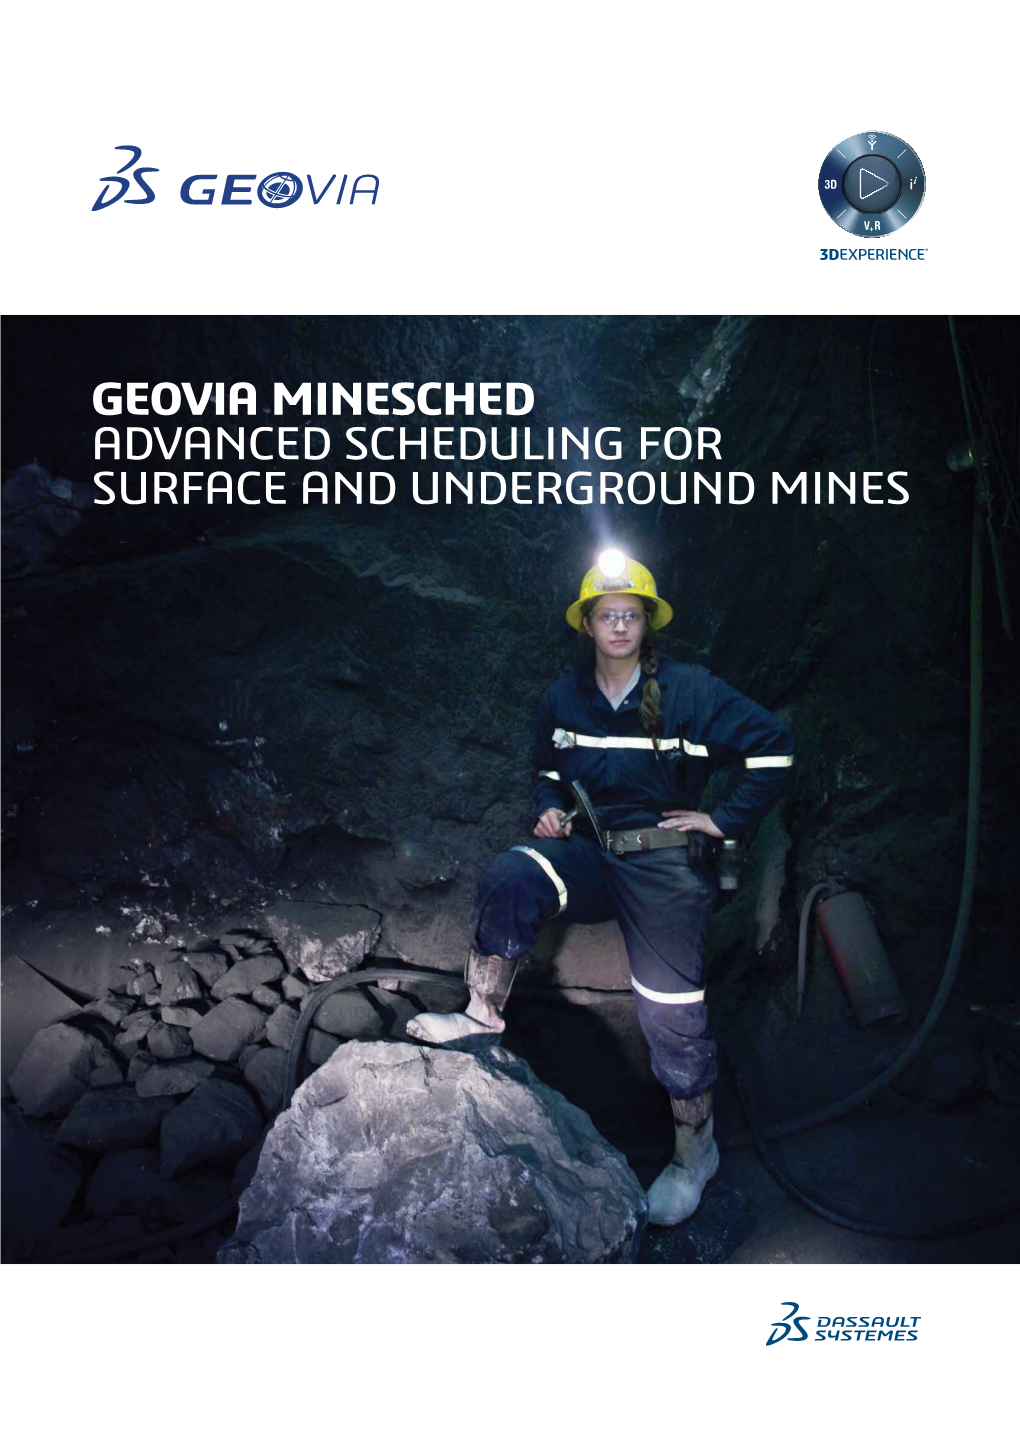 Geovia Minesched Advanced Scheduling for Surface and Underground Mines the World’S Most Advanced Scheduling User Experience